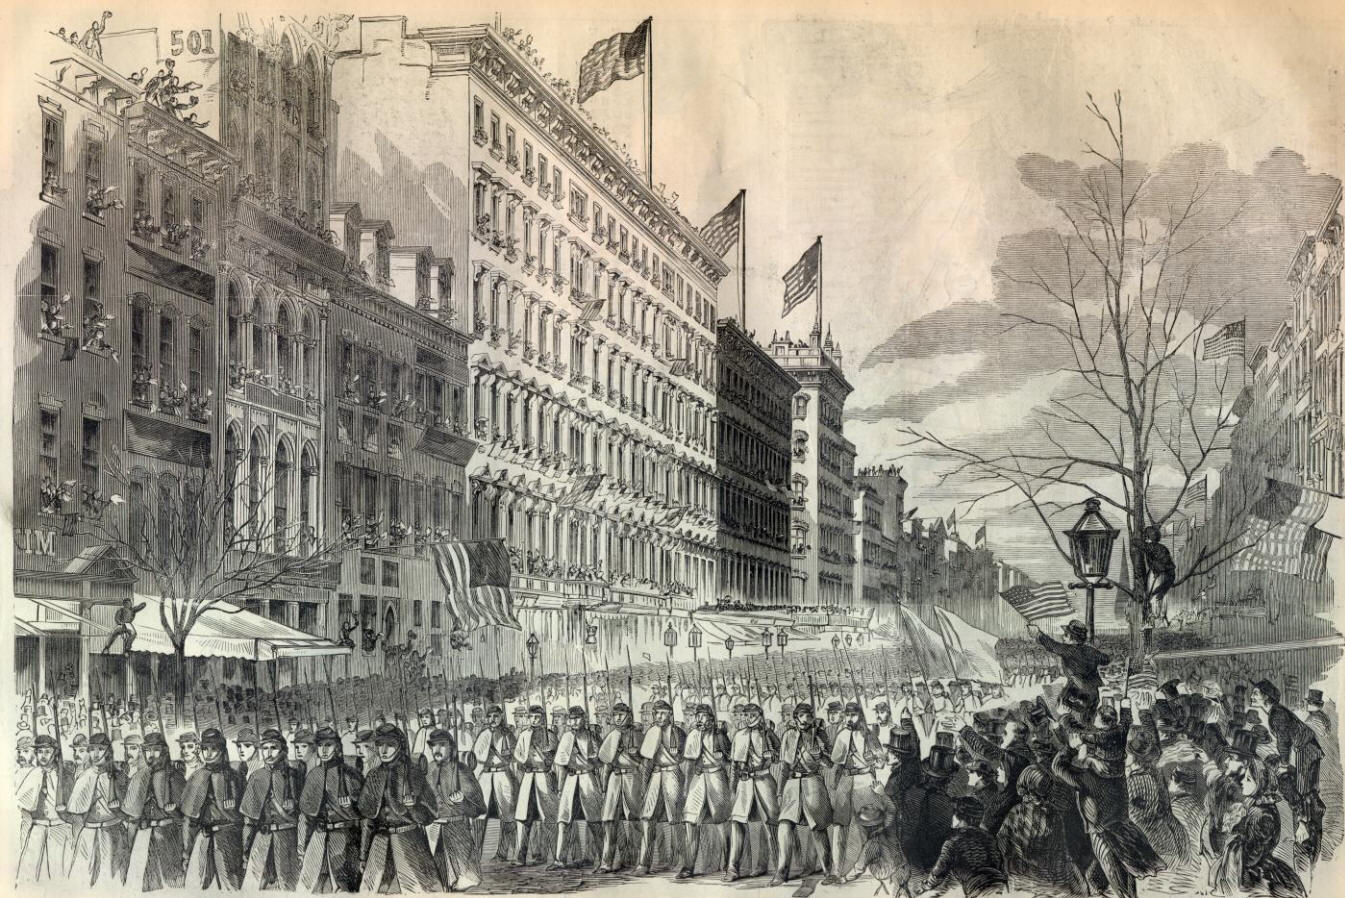 The Seventh Regiment Soldiers Marching